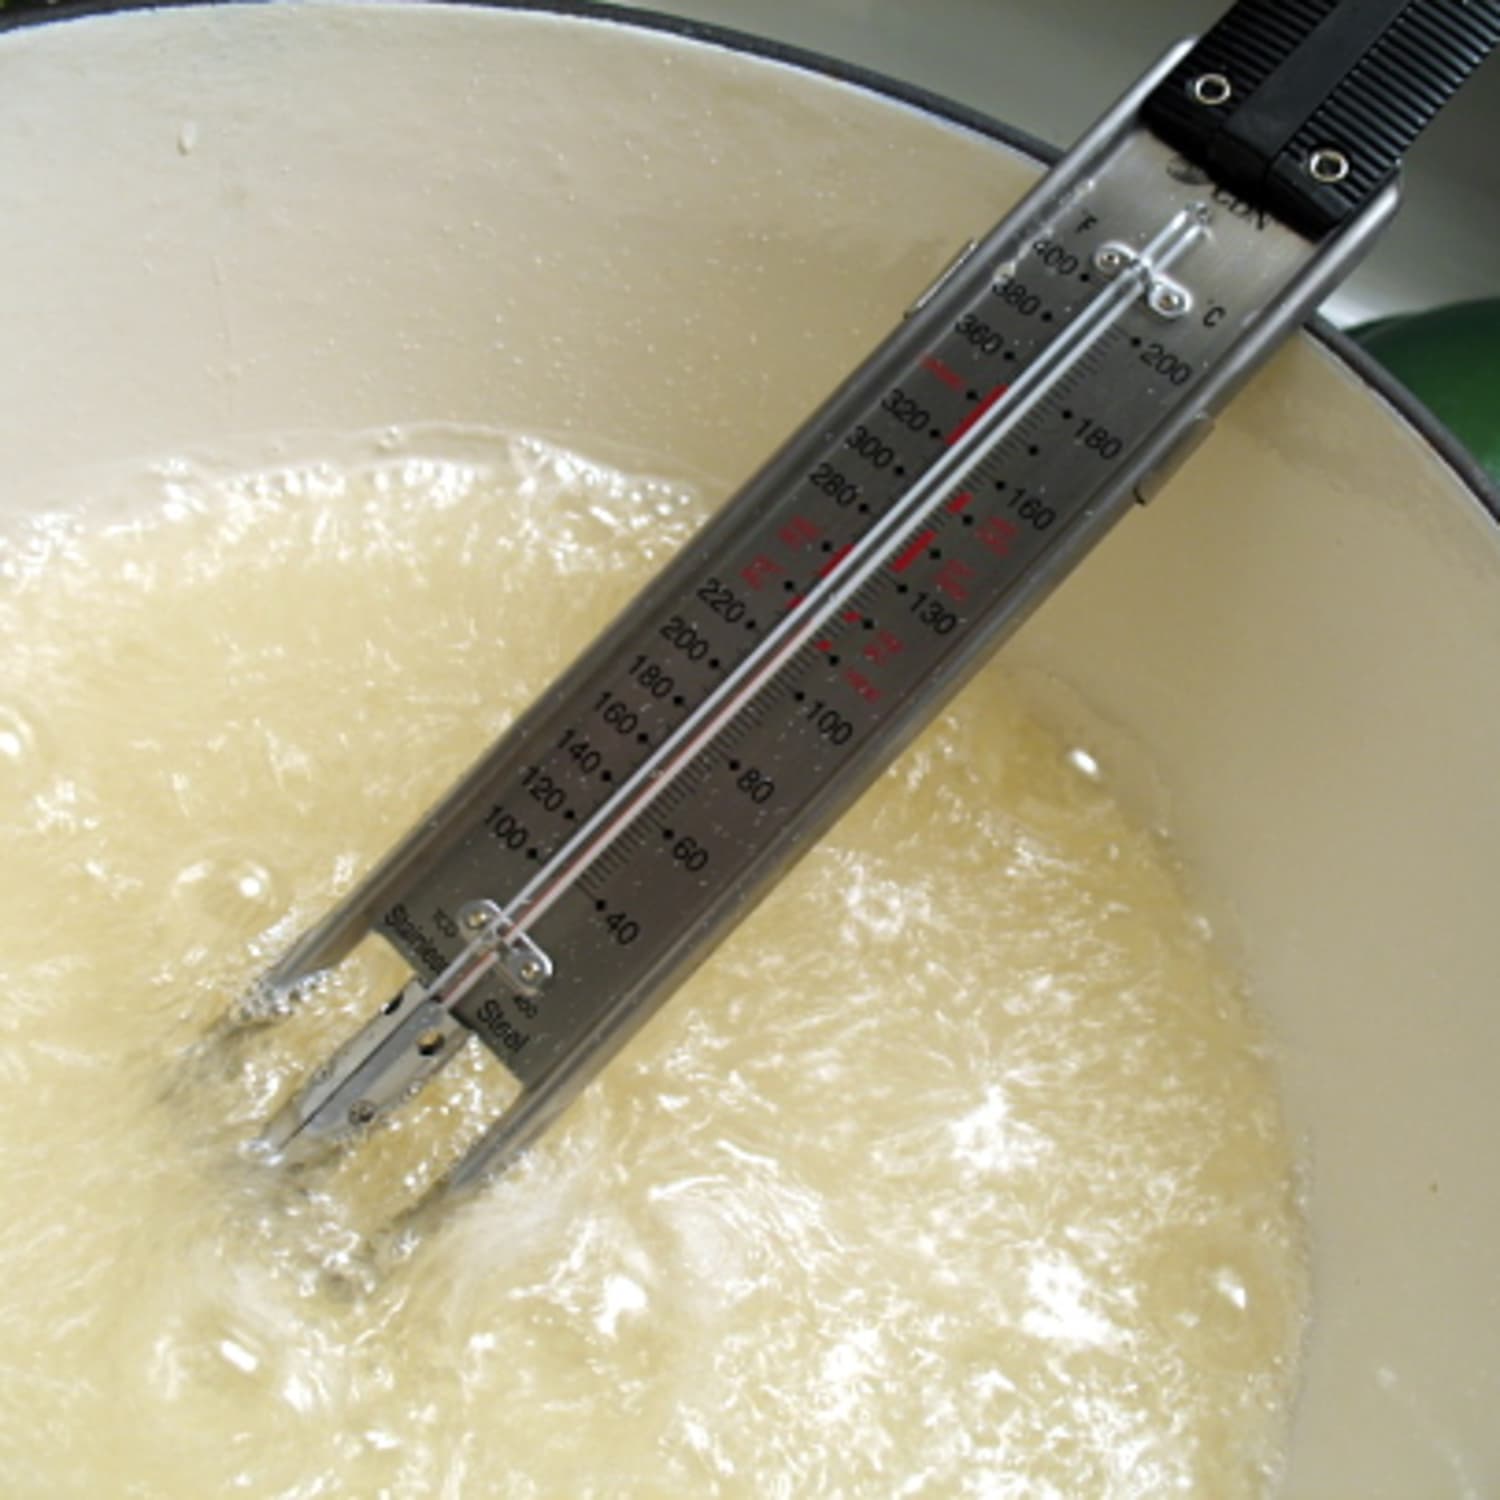 Candy-Making Basics: How to Work with Sugar